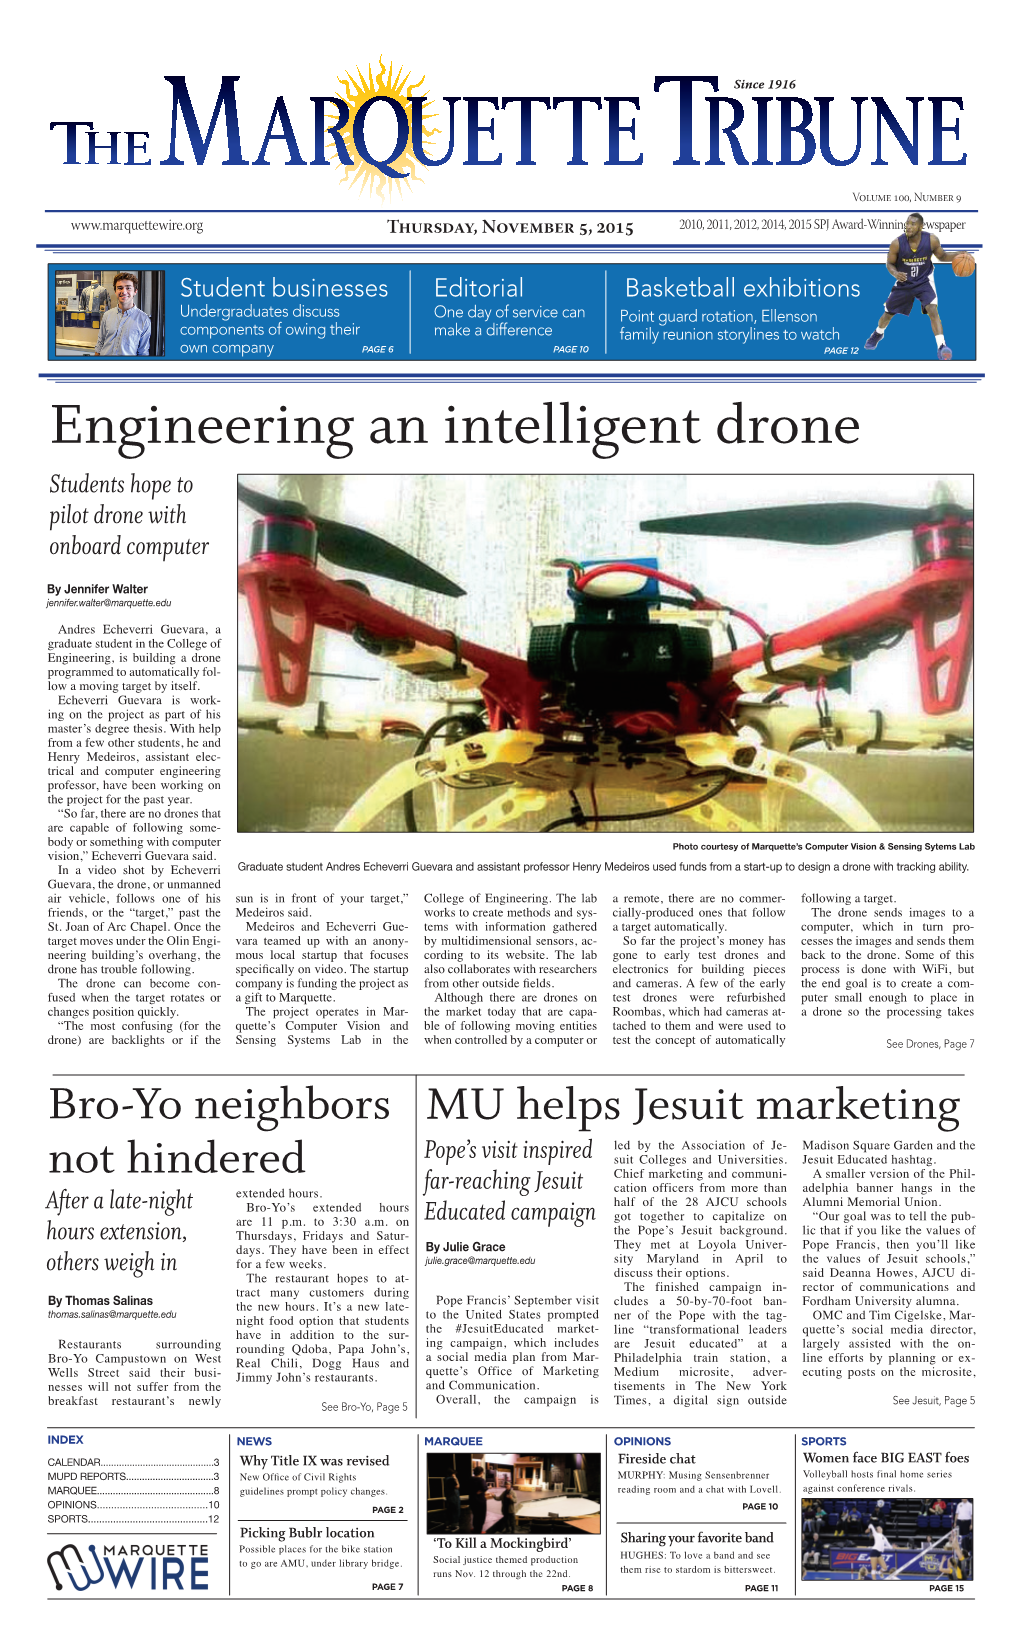 Engineering an Intelligent Drone Students Hope to Pilot Drone with Onboard Computer